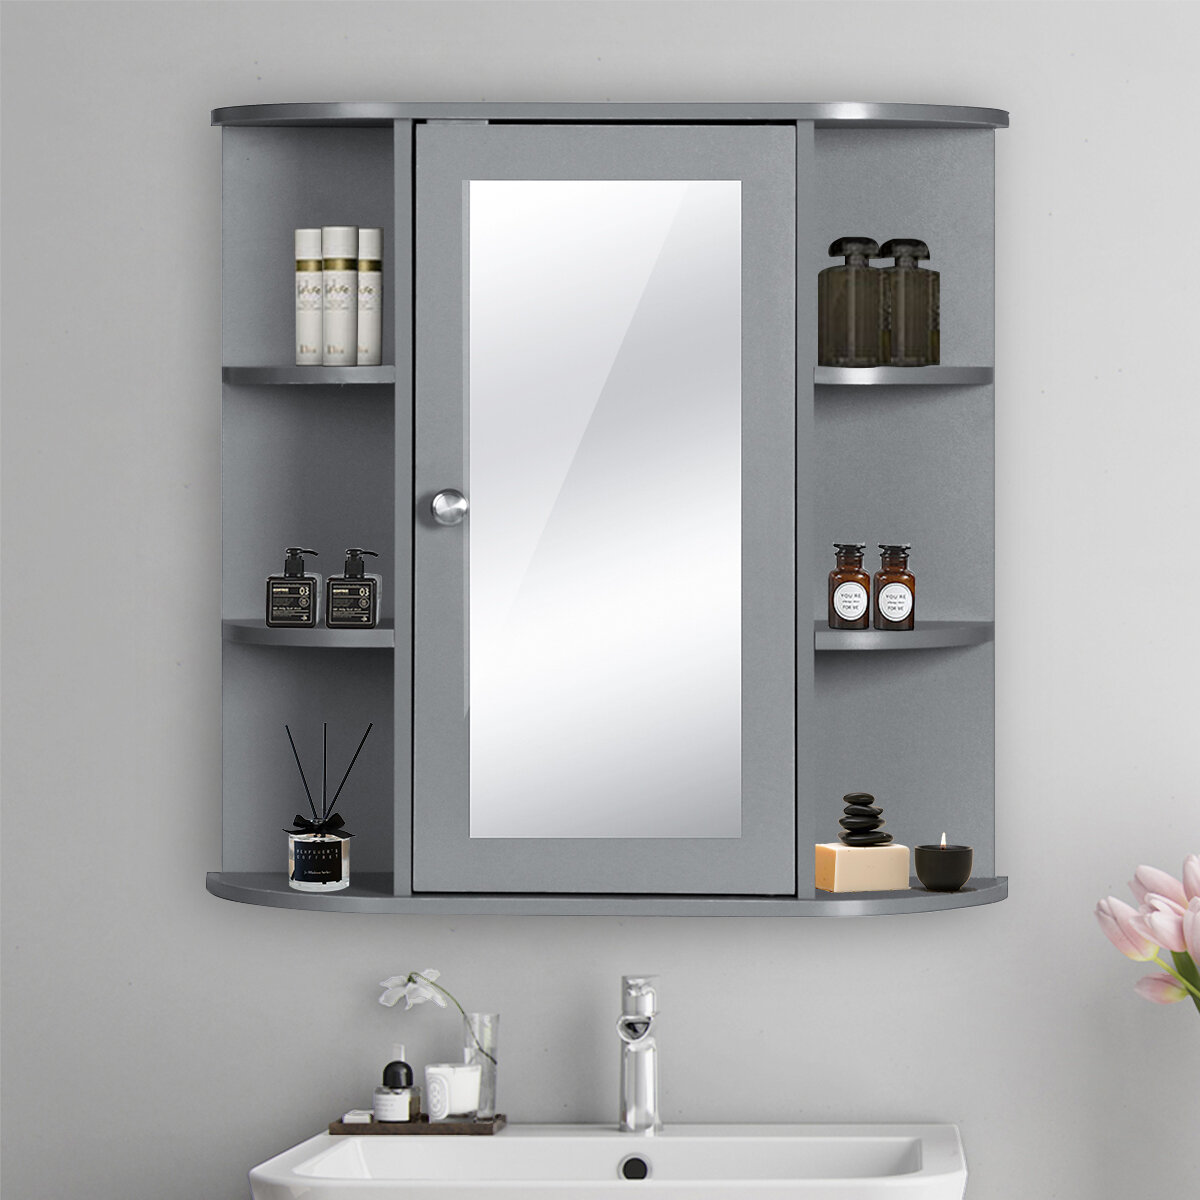 Privmedi Wall-mounted Hanging Bathroom Cabinet Wooden Adjustable Shelves&Mirror, Adjustable Height, Large Capacity